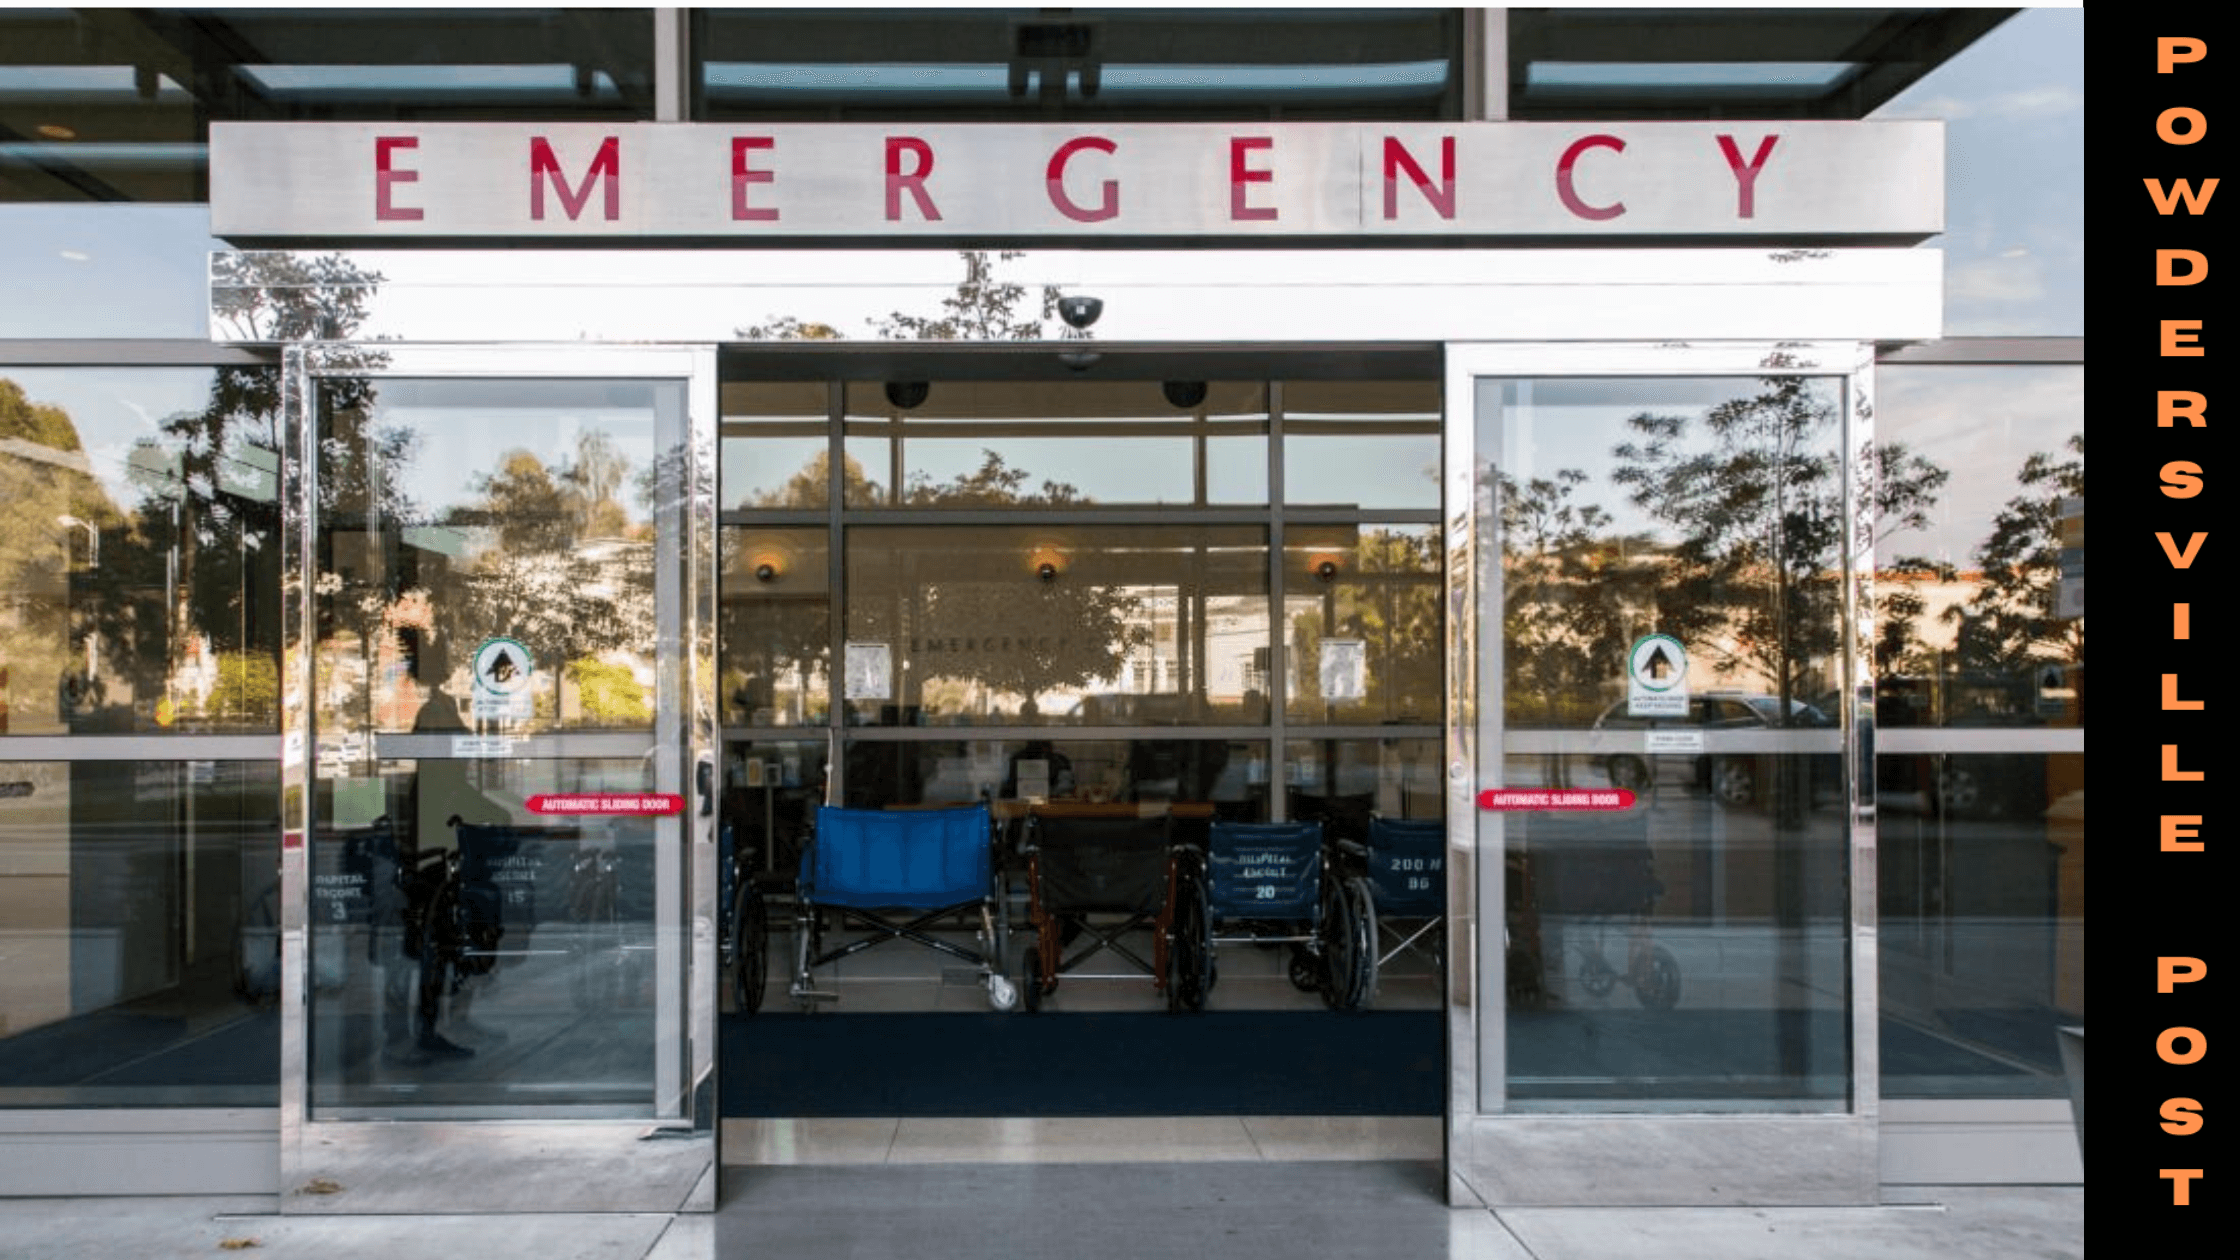 Many Emergencies Except The Covid-19 Have Ended In California